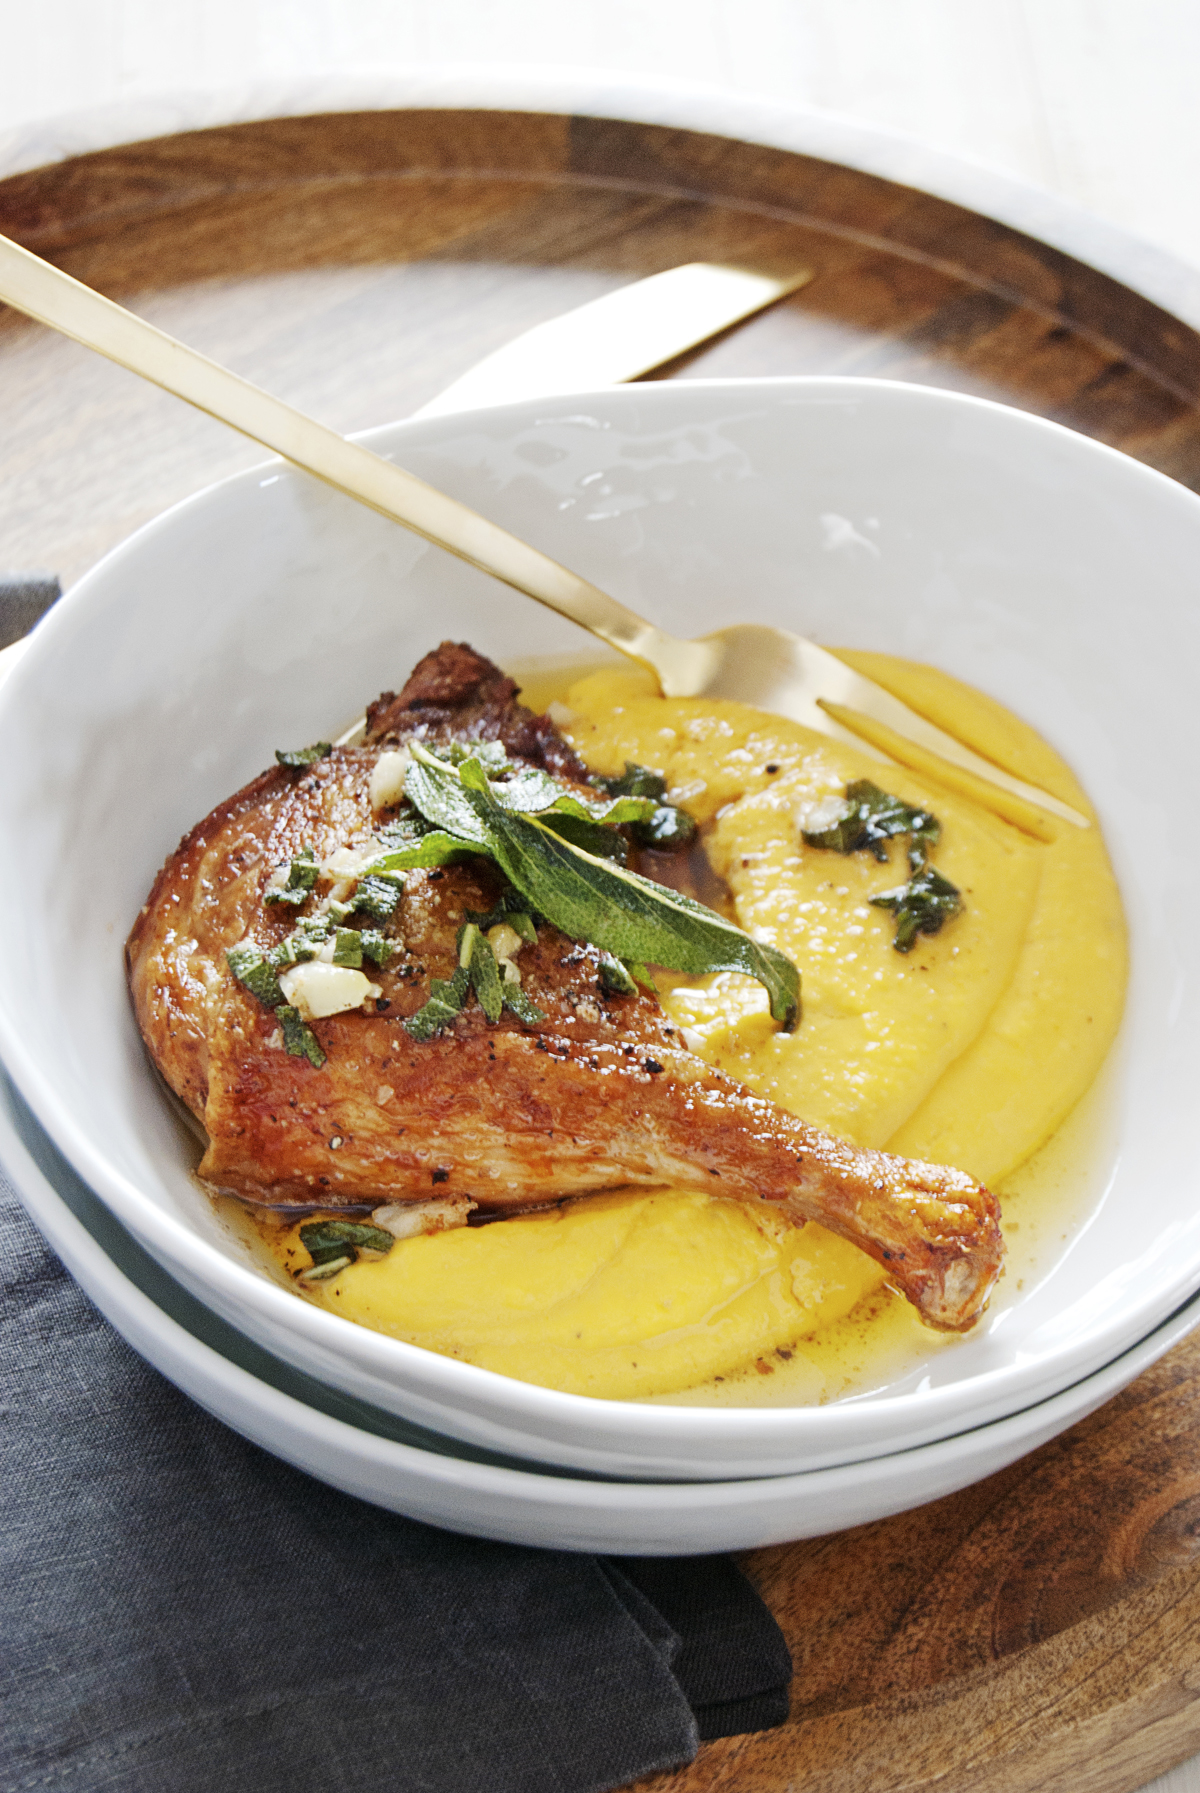 Oven Roasted Duck with Butternut Squash Puree - The Charming Detroiter